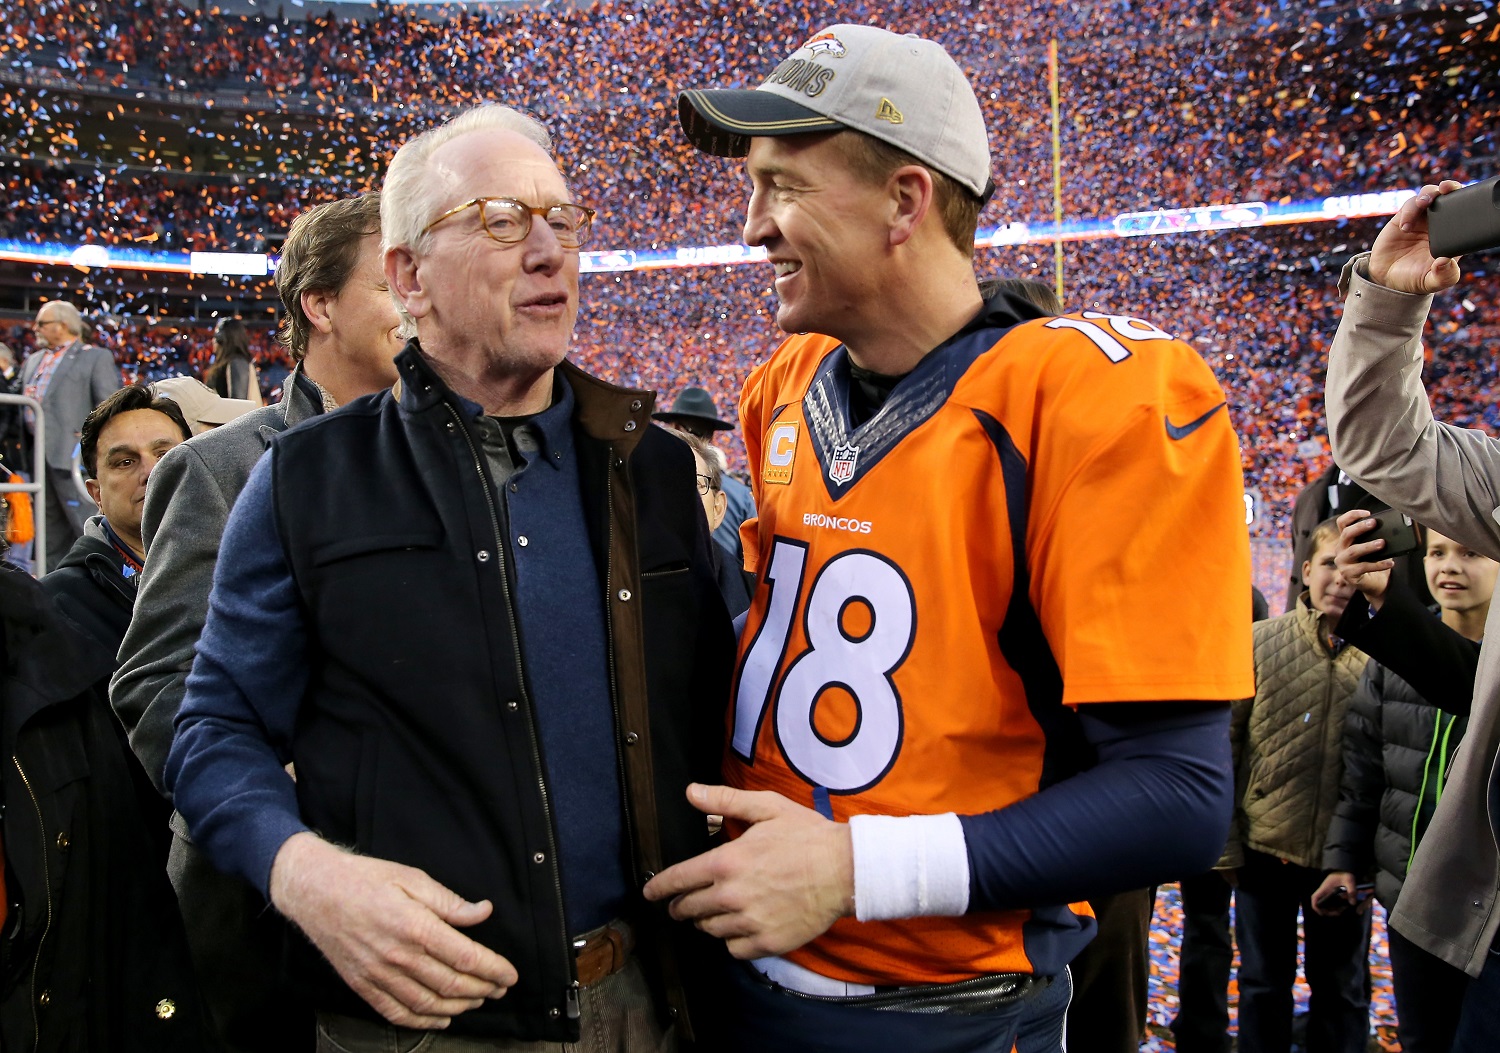 Peyton Manning has already made a huge decision in the Hall of Fame